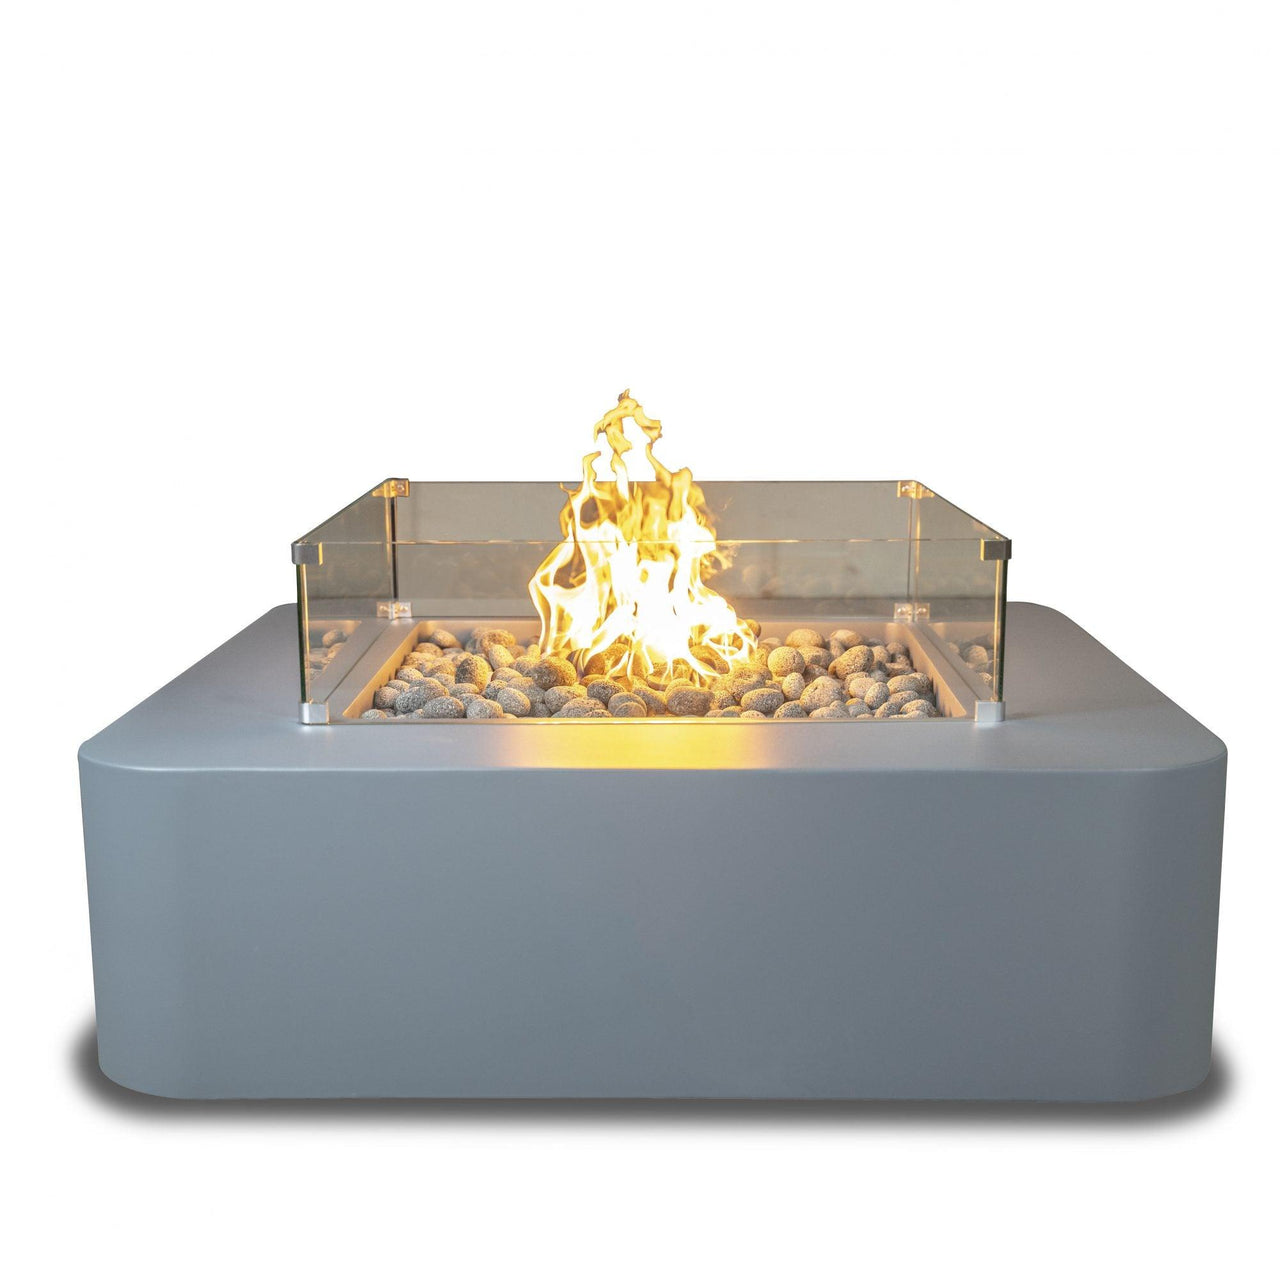 The Outdoor Plus - Bayside Square Metal Powder Coat Fire Pit OPT-BAYPC - Fire Pit Stock